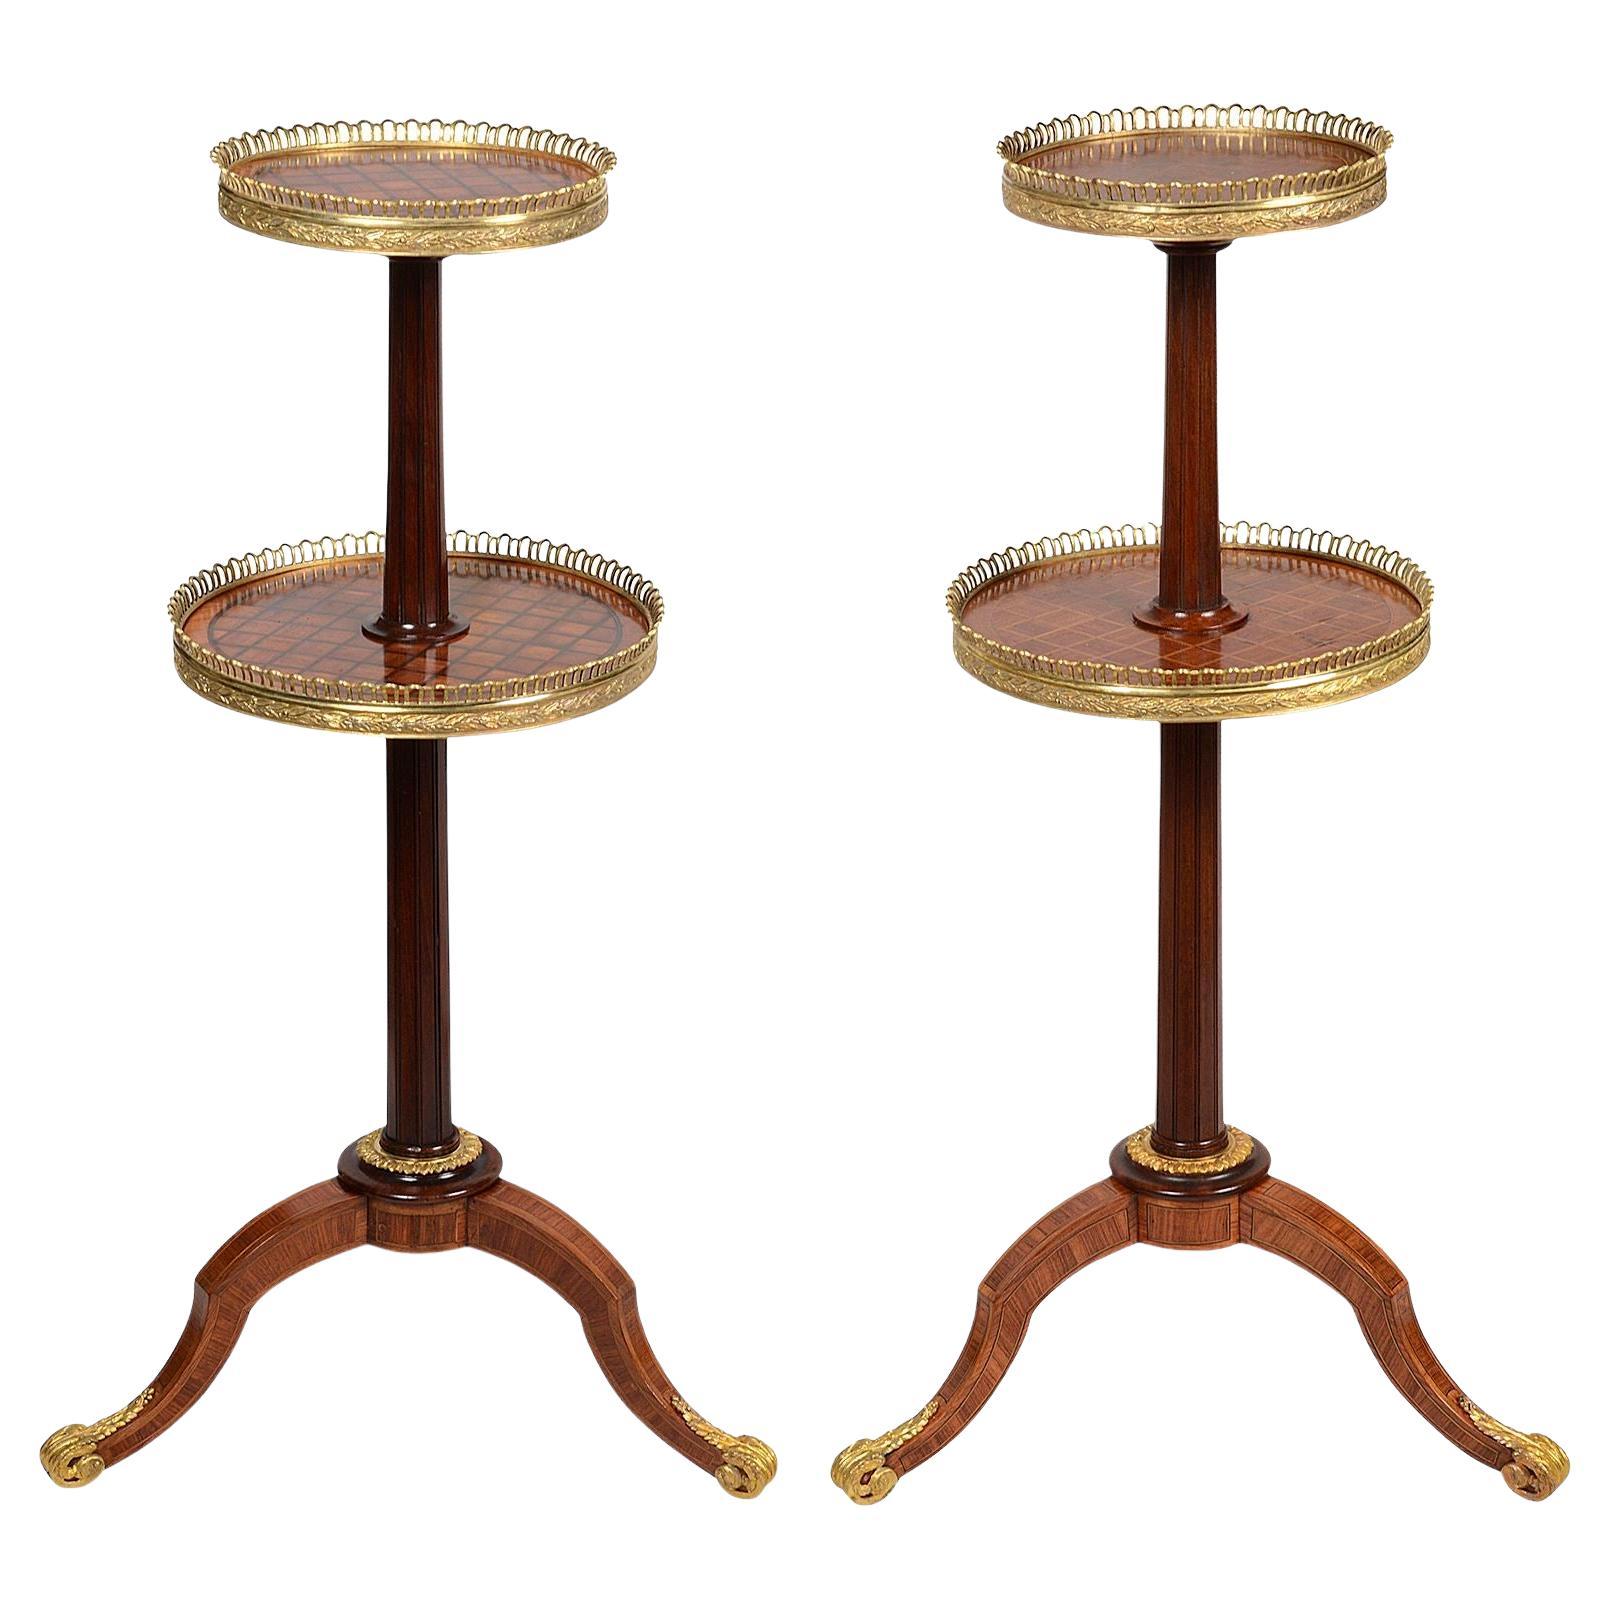 Fine Quality Pair of Two Tier Etegeres, After Donald Ross, circa 1860